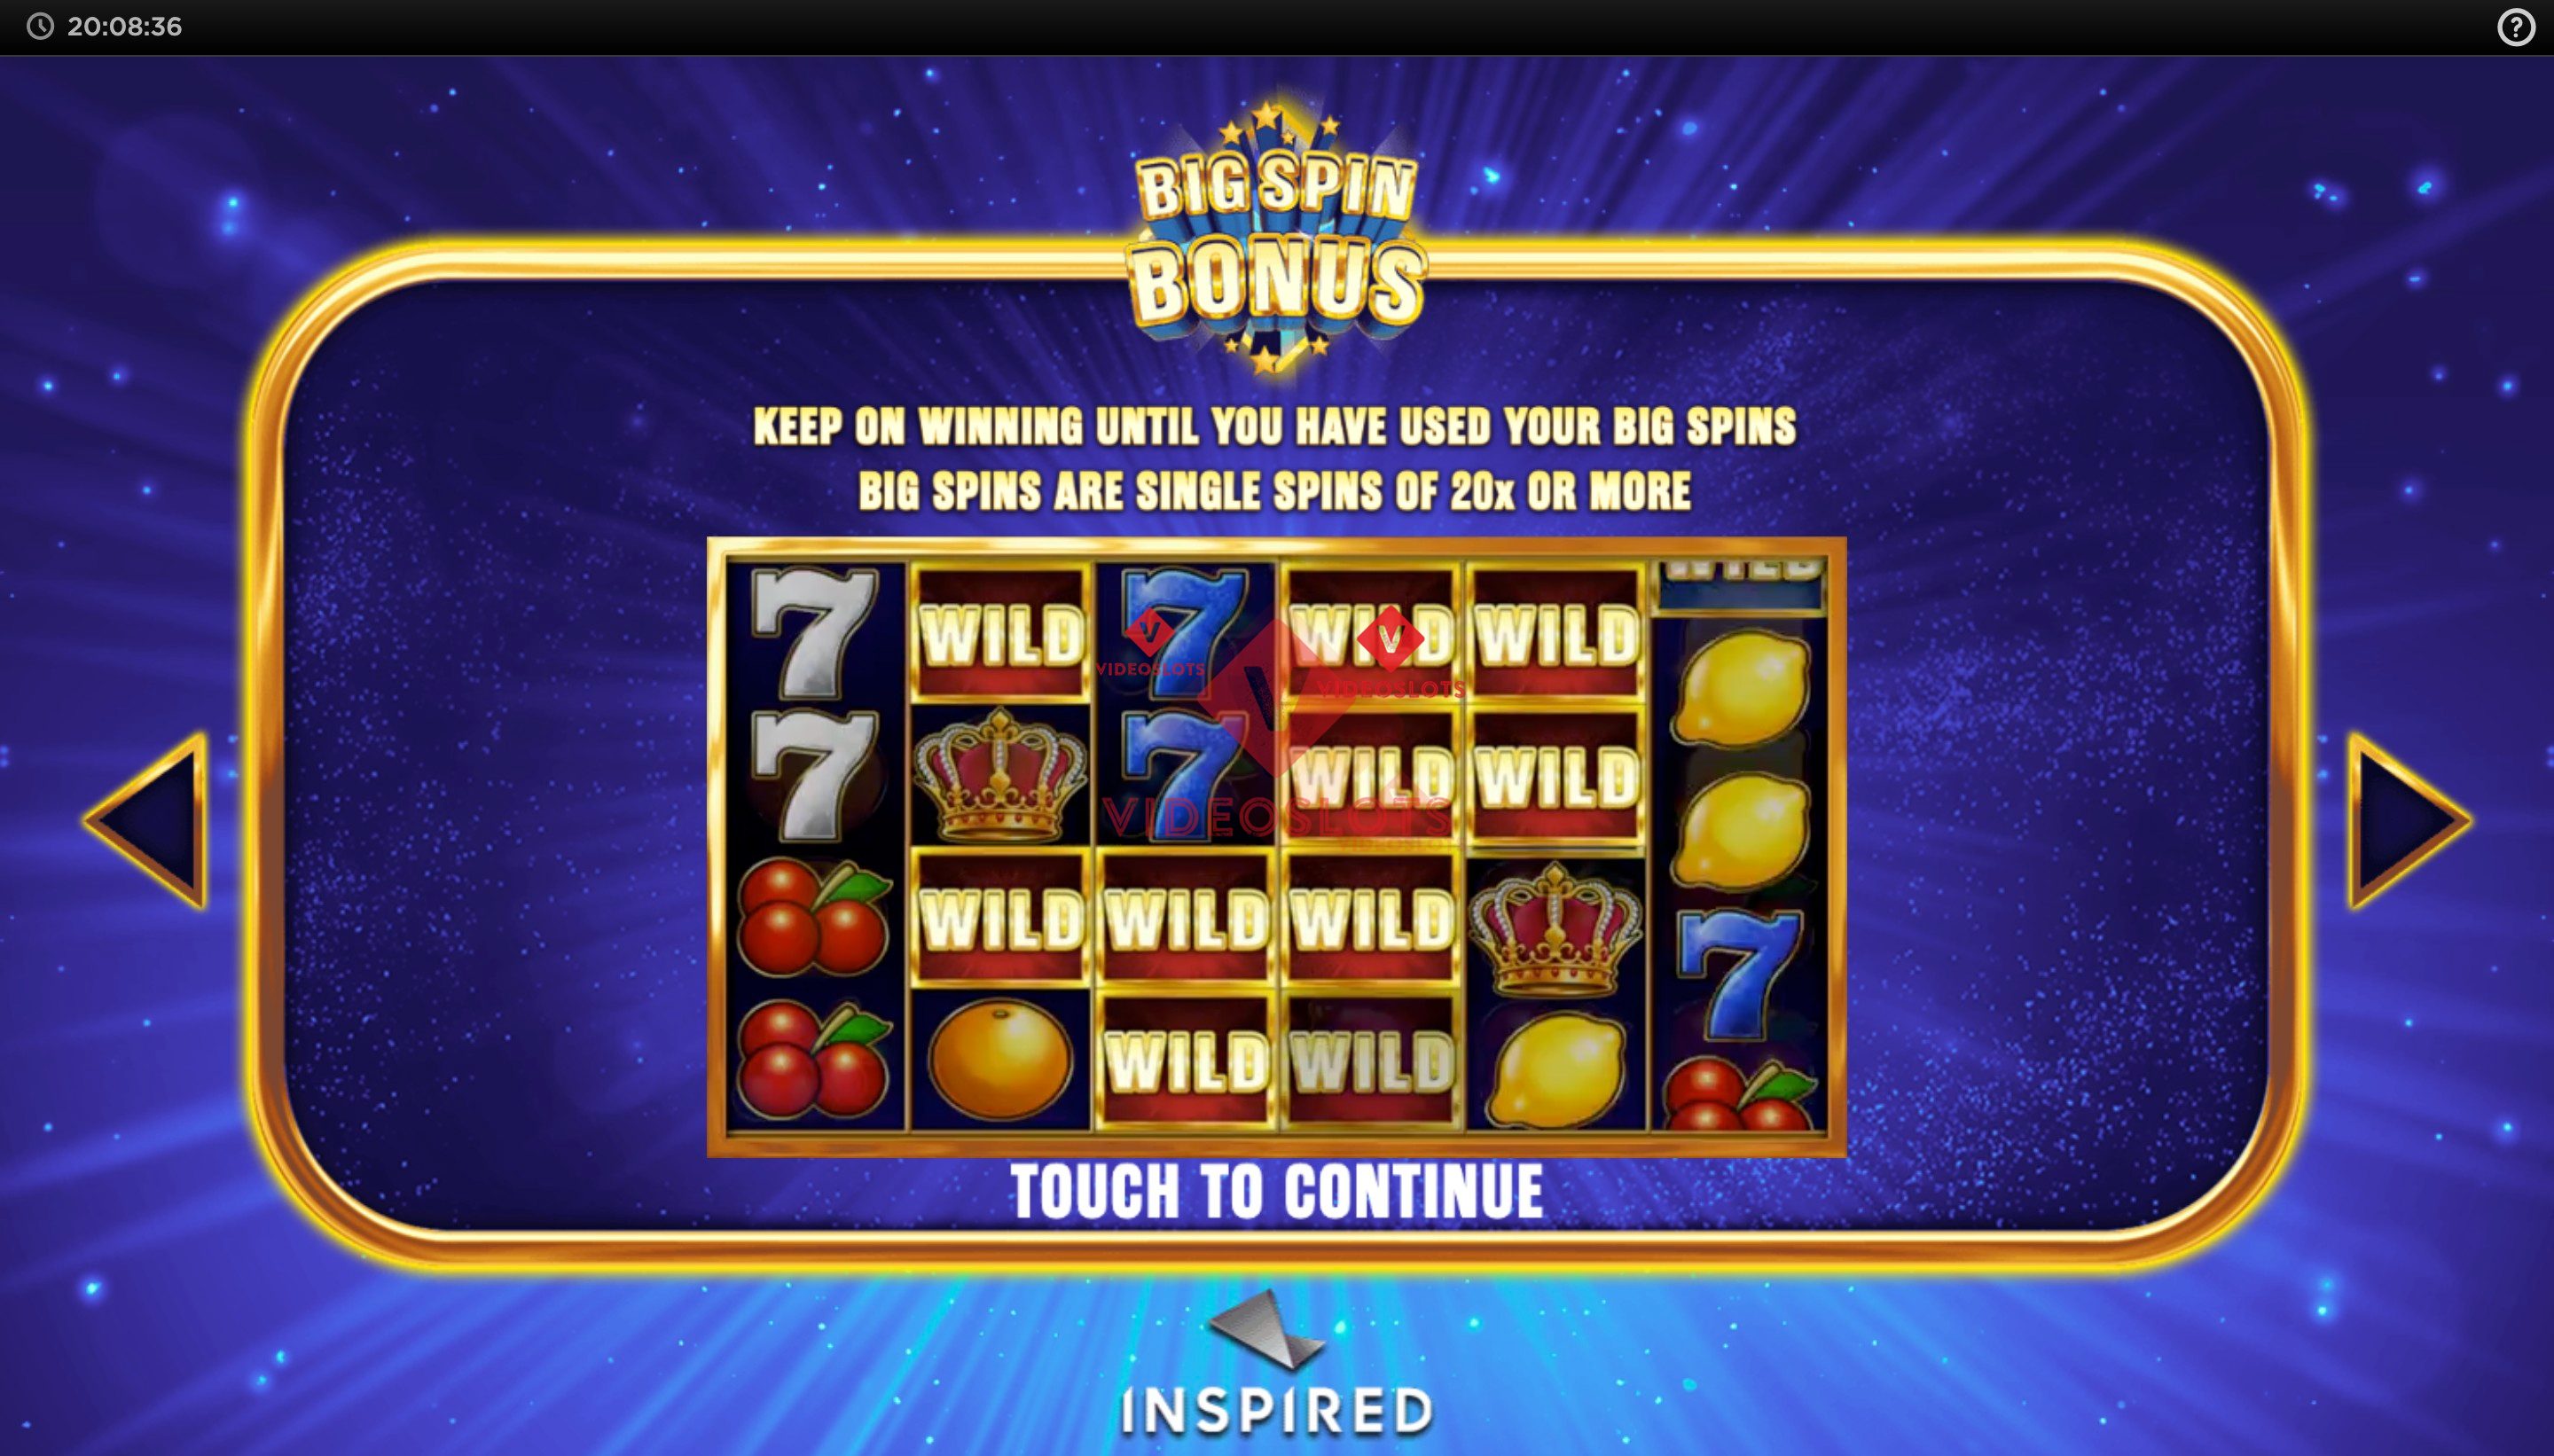 Game Intro for Big Spin Bonus slot from Inspired Gaming